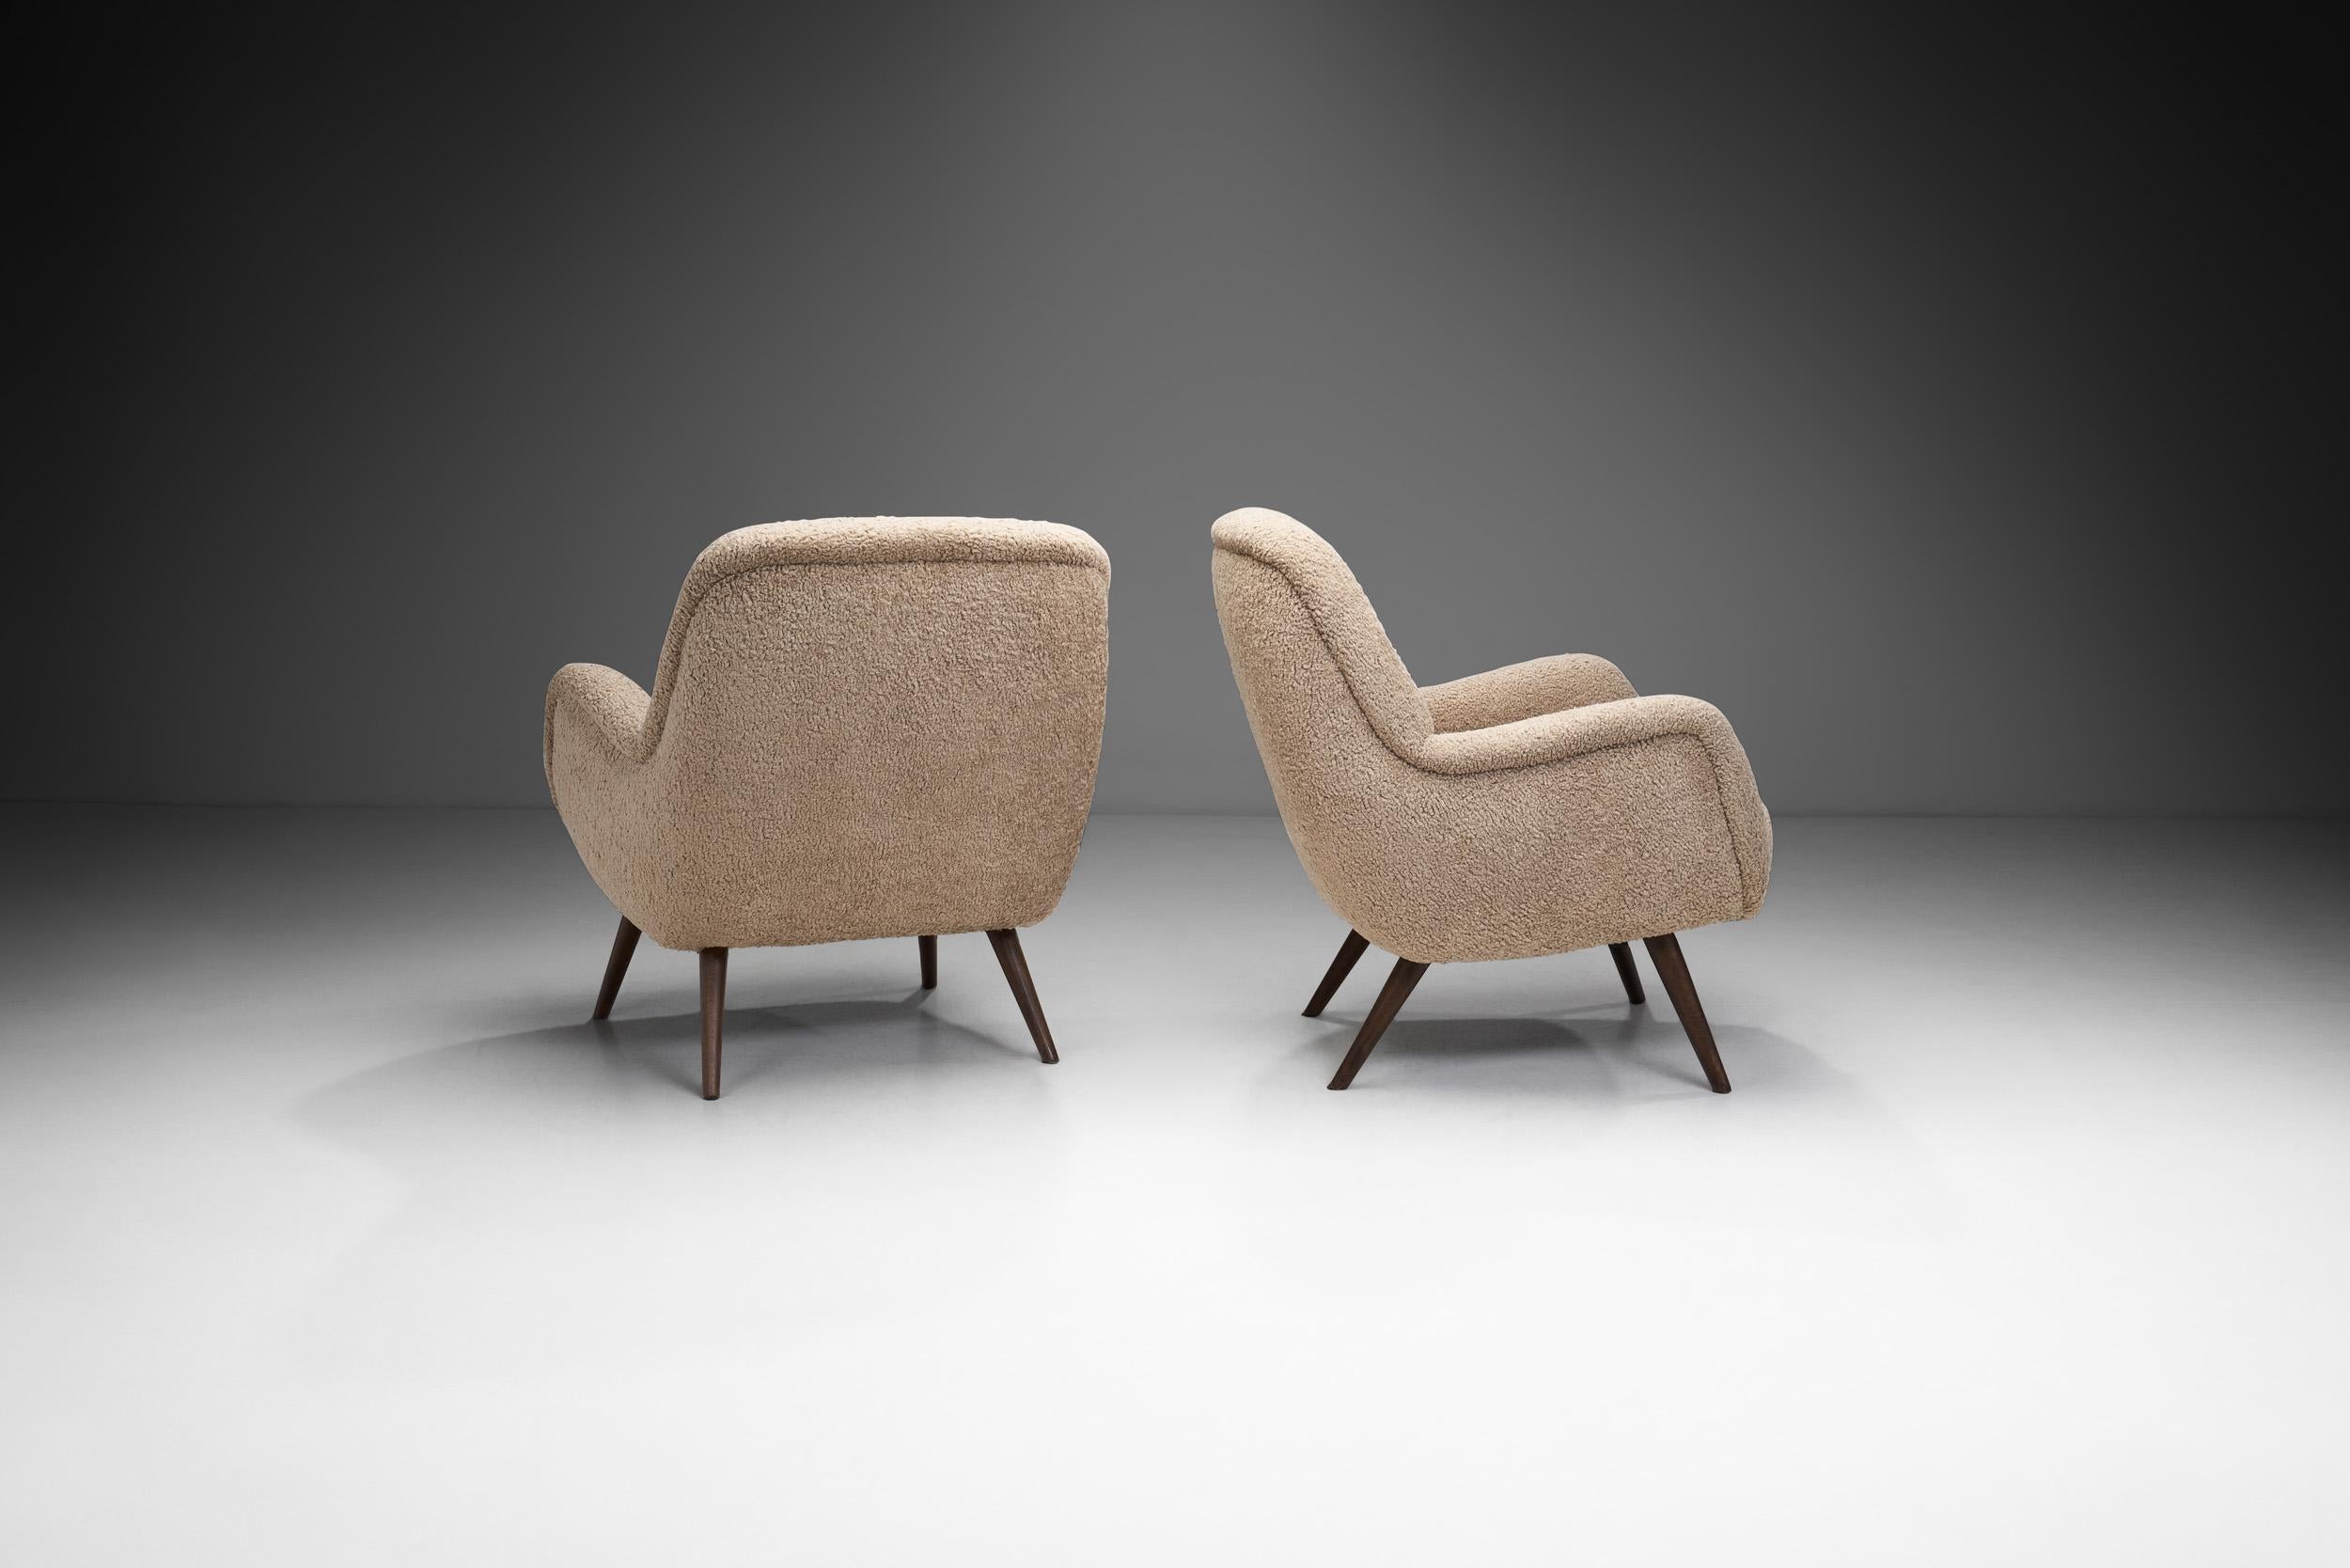 Fabric European Mid-Century Modern Lounge Chairs in Bouclé with Oak Legs, Europe 1960s For Sale